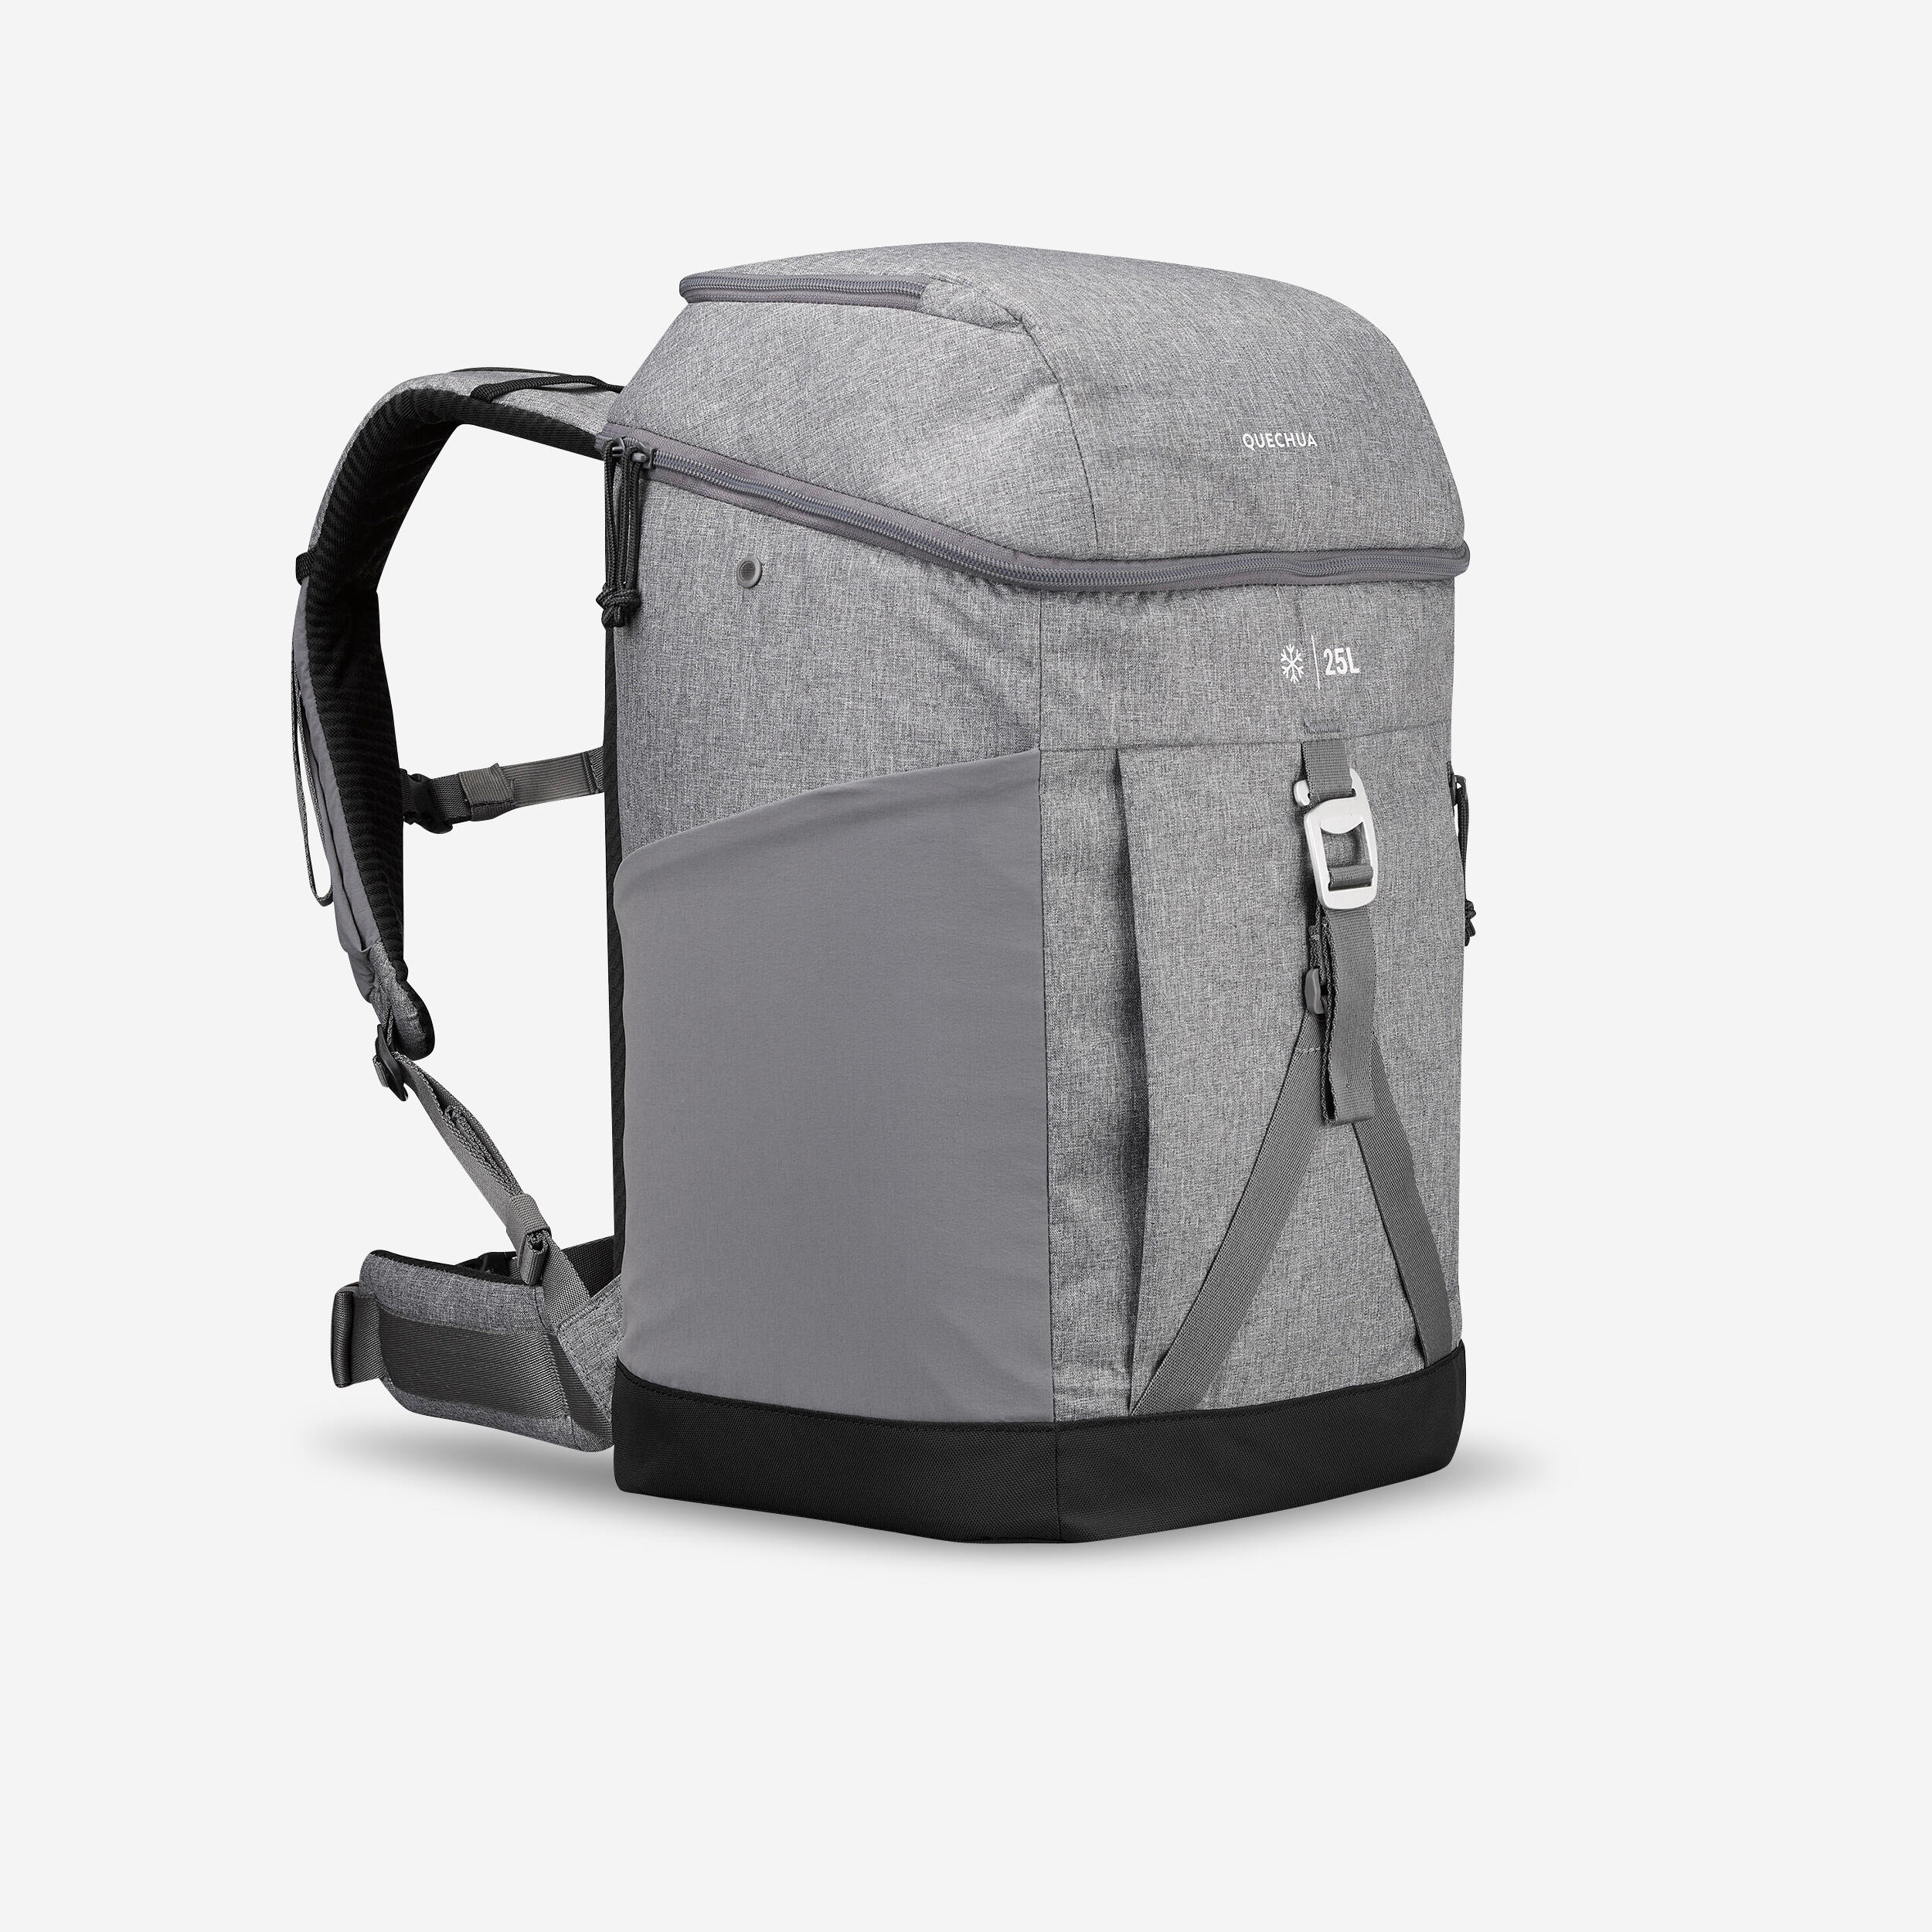 sac à dos isotherme 25l - nh500 ice compact - quechua